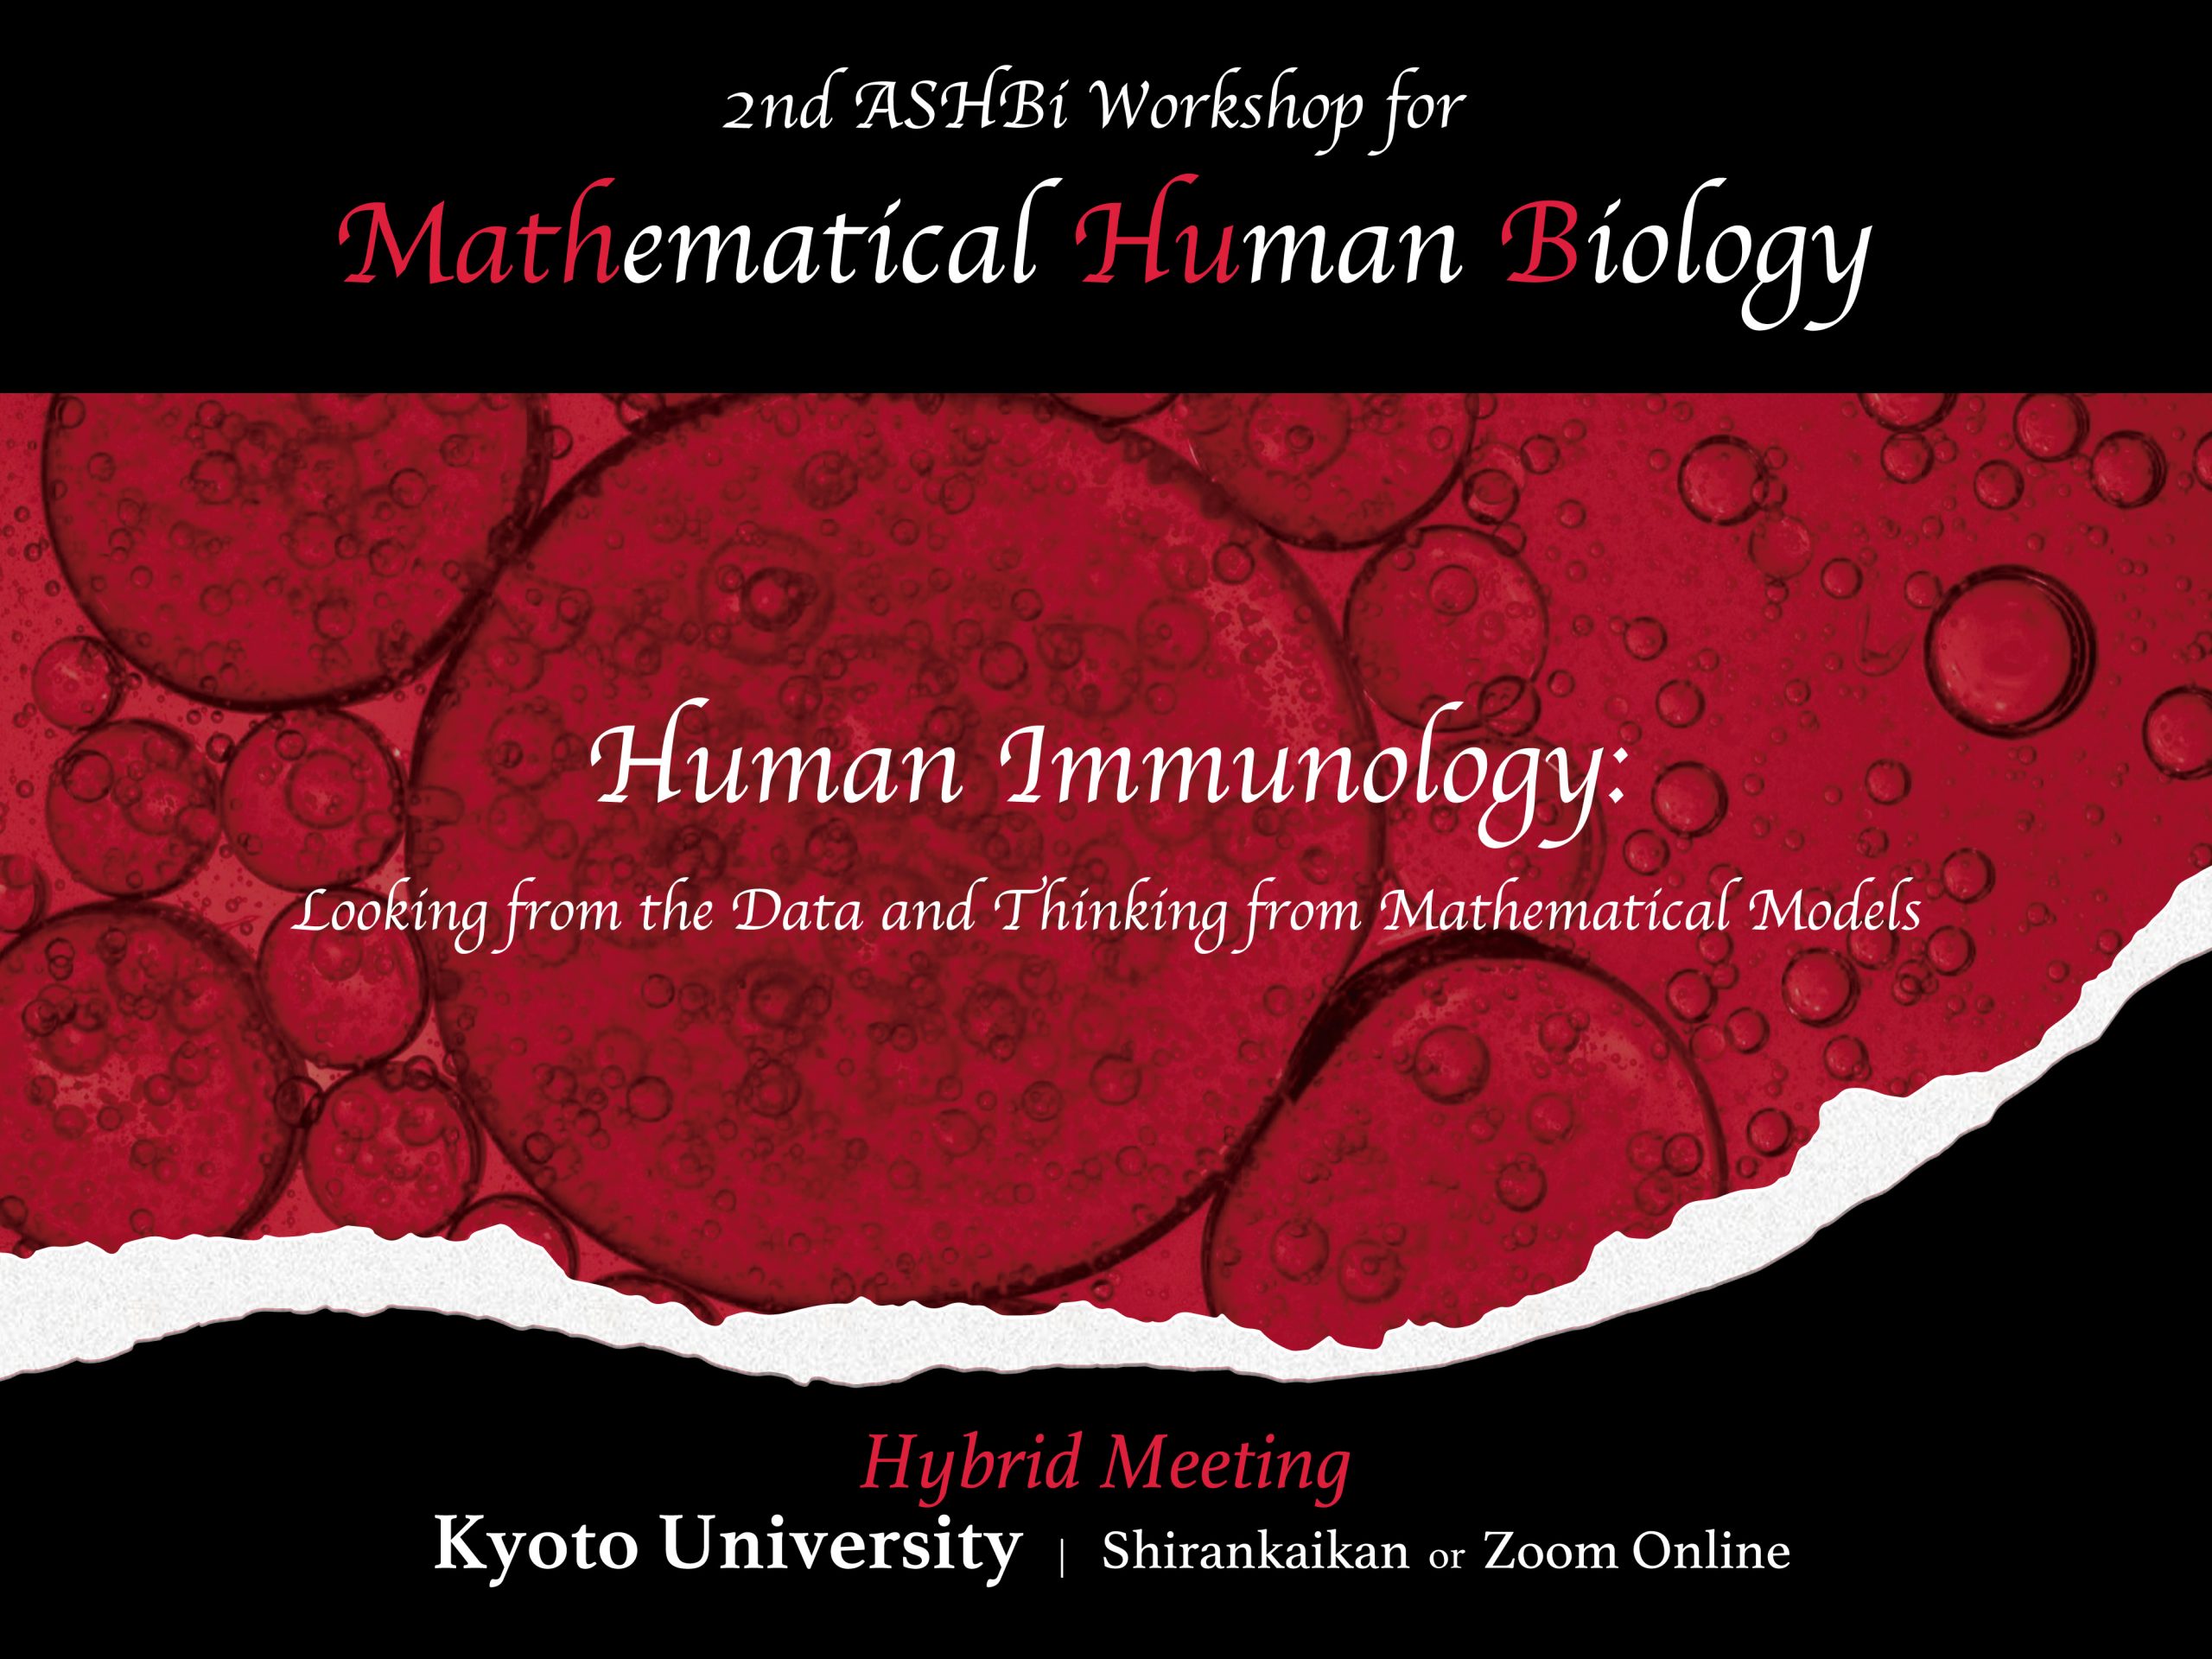 The 2nd ASHBi workshop for Mathematical Human Biology: Human Immunology –  Looking from the Data and Thinking from Mathematical Models